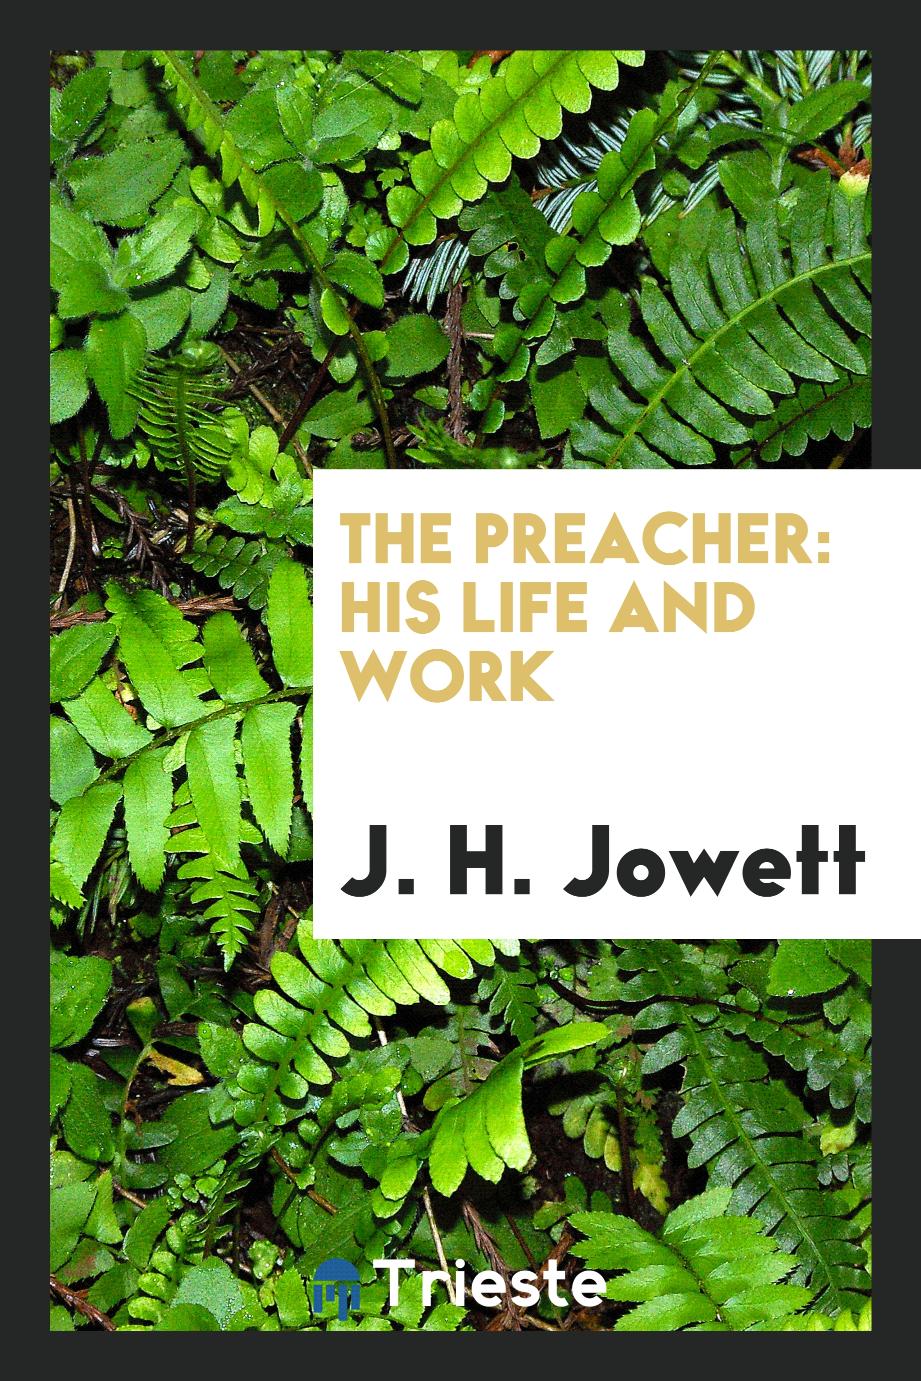 The preacher: his life and work